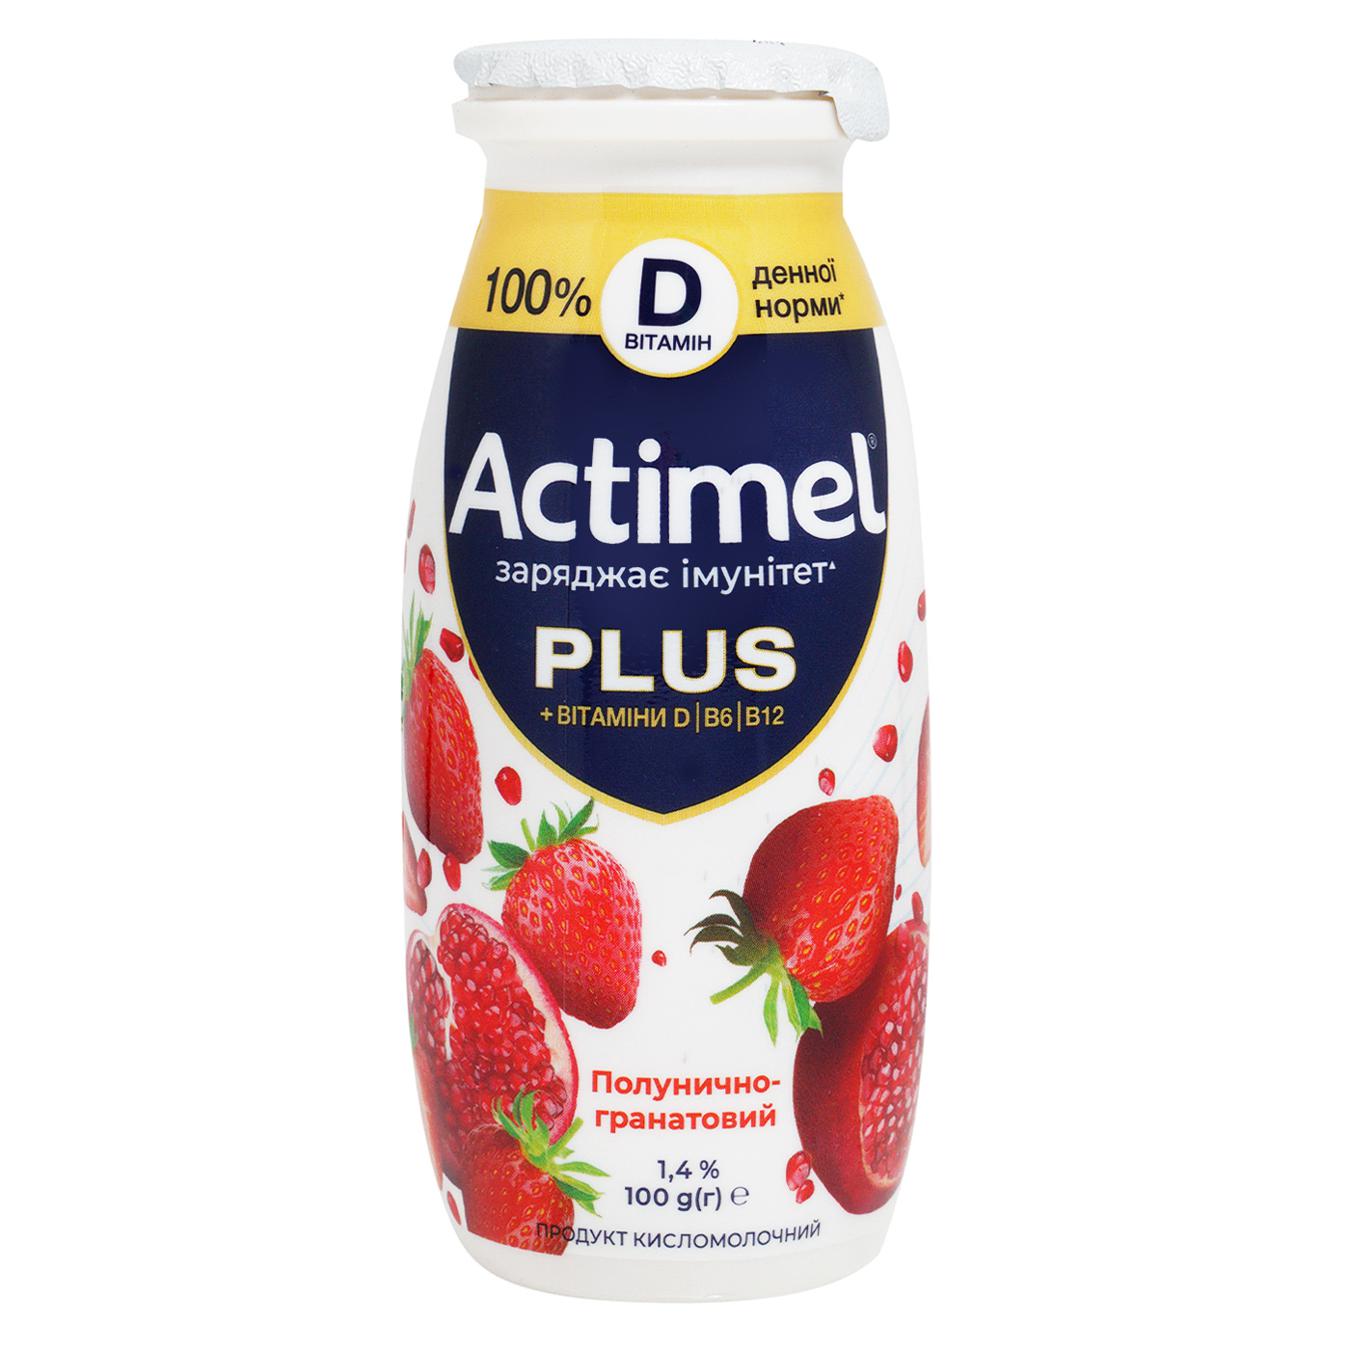 Actimel strawberry-pomegranate fermented milk product 1.4% 100g